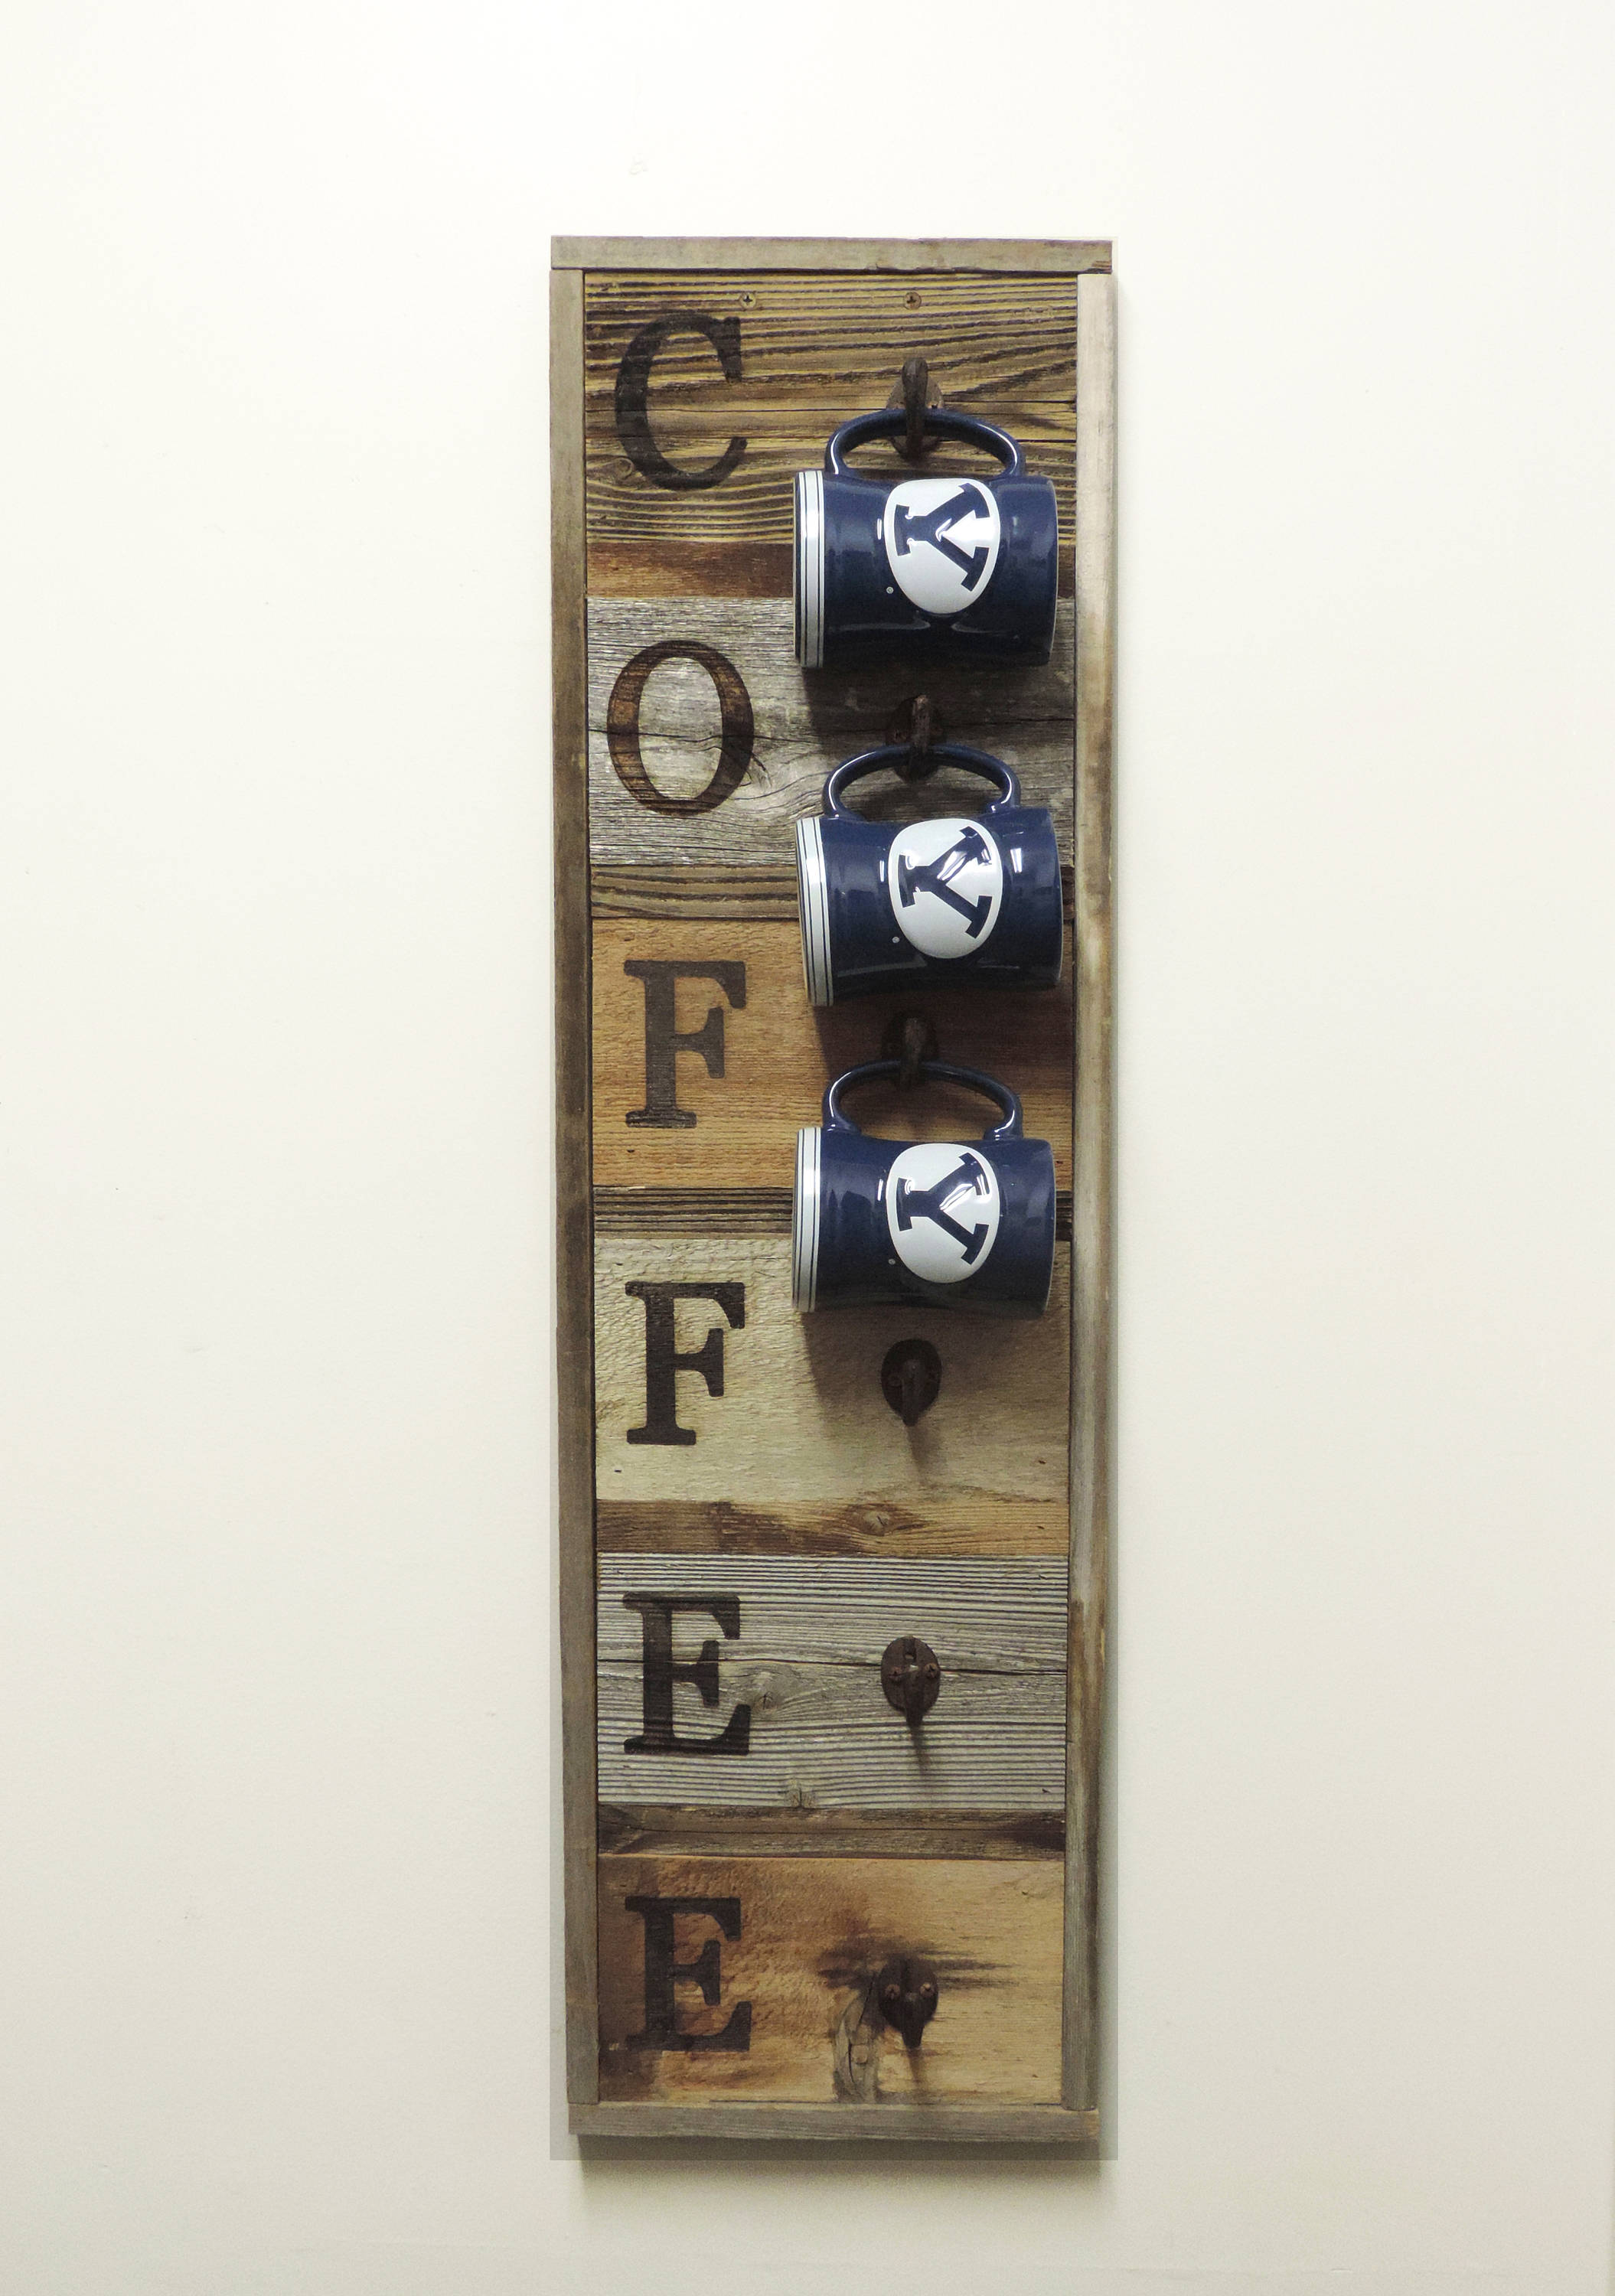 Barnwood Coffee Mug Rack Wall Mounted Decorative Display Storage for the Kitchen Hanging Cup Holder Wooden Organizer 31.5 X 7.25 AllBarnwood Farmhouse Cafe sign